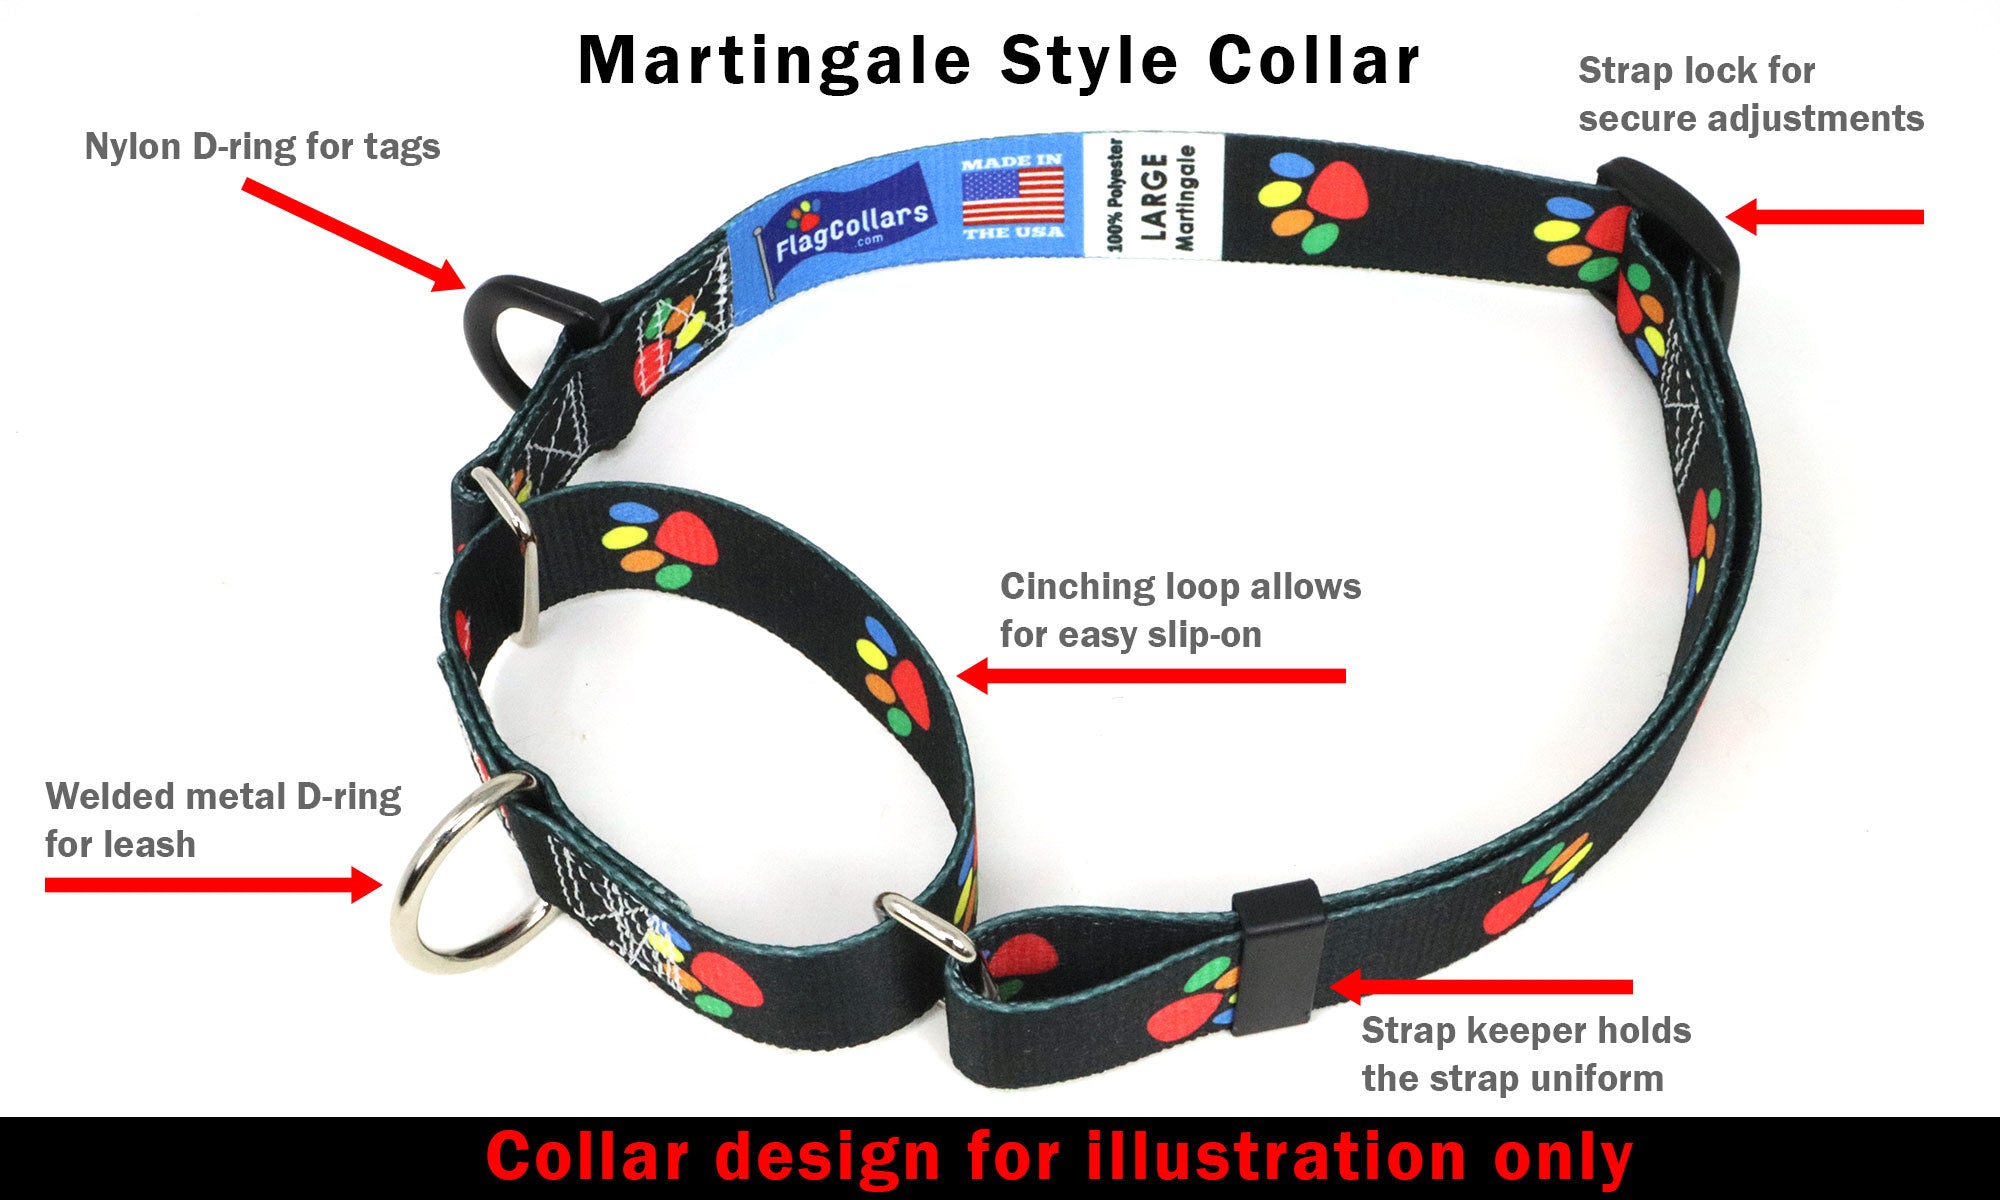 Liechtenstein Dog Collar for Soccer Fans | Black or Pink | Quick Release or Martingale Style | Made in NJ, USA